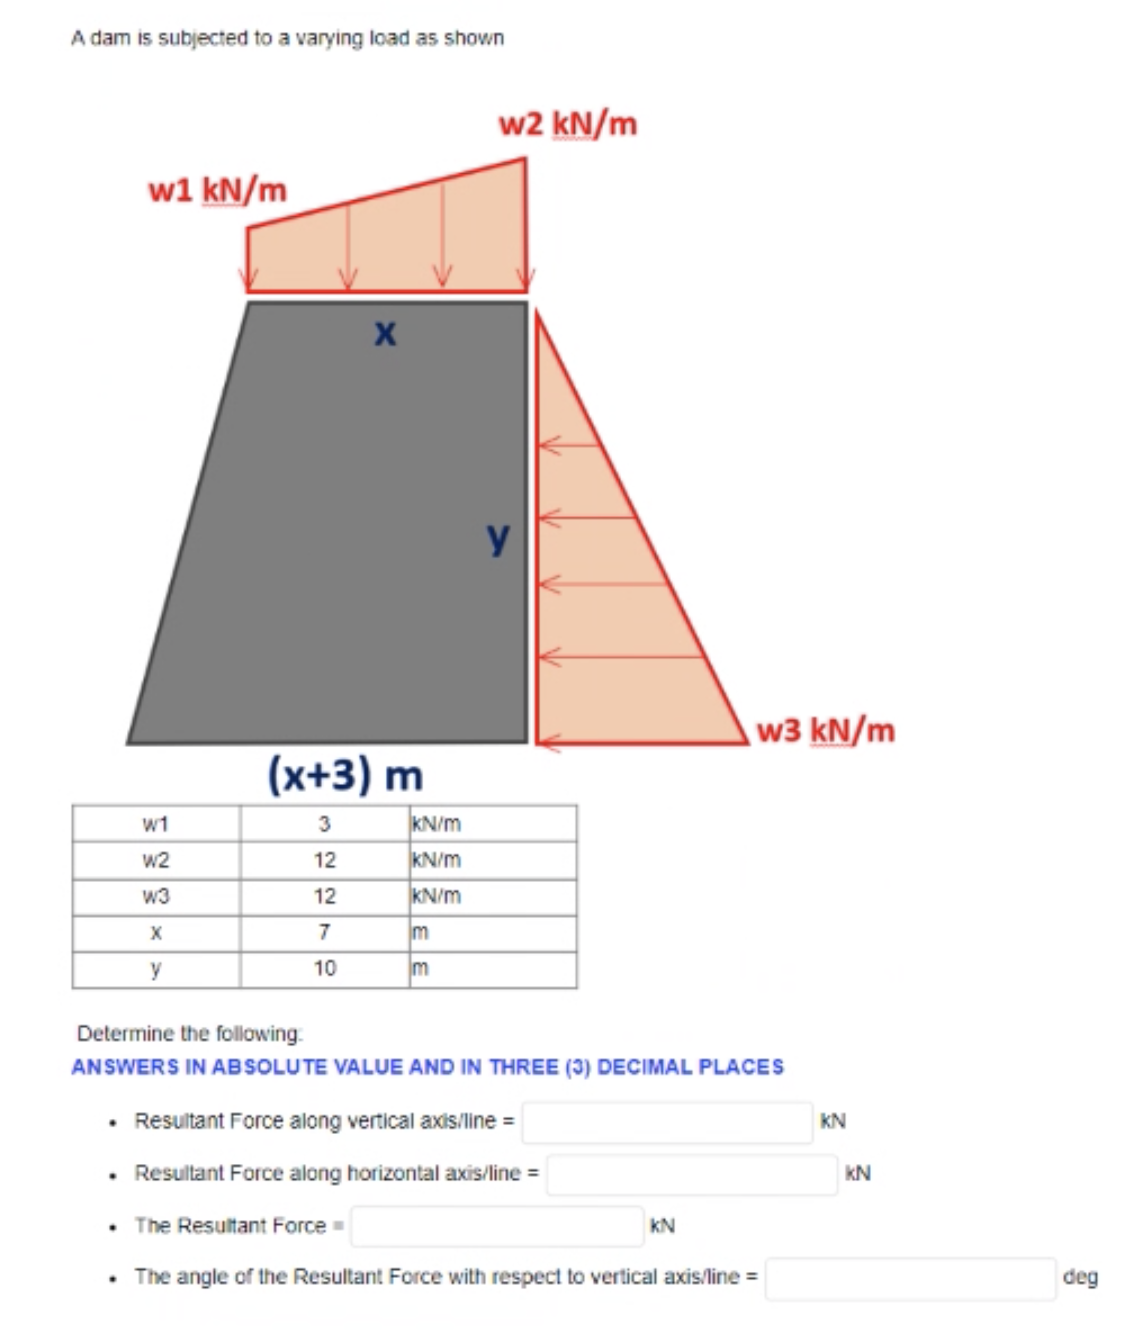 A dam is subjected to a varying load as shown
w1 kN/m
W1
W2
W3
X
y
X
(x+3) m
3
12
12
7
10
kN/m
kN/m
kN/m
m
m
w2 kN/m
w3 kN/m
Determine the following:
ANSWERS IN ABSOLUTE VALUE AND IN THREE (3) DECIMAL PLACES
Resultant Force along vertical axis/line =
Resultant Force along horizontal axis/line =
• The Resultant Force=
• The angle of the Resultant Force with respect to vertical axis/line =
KN
KN
KN
deg